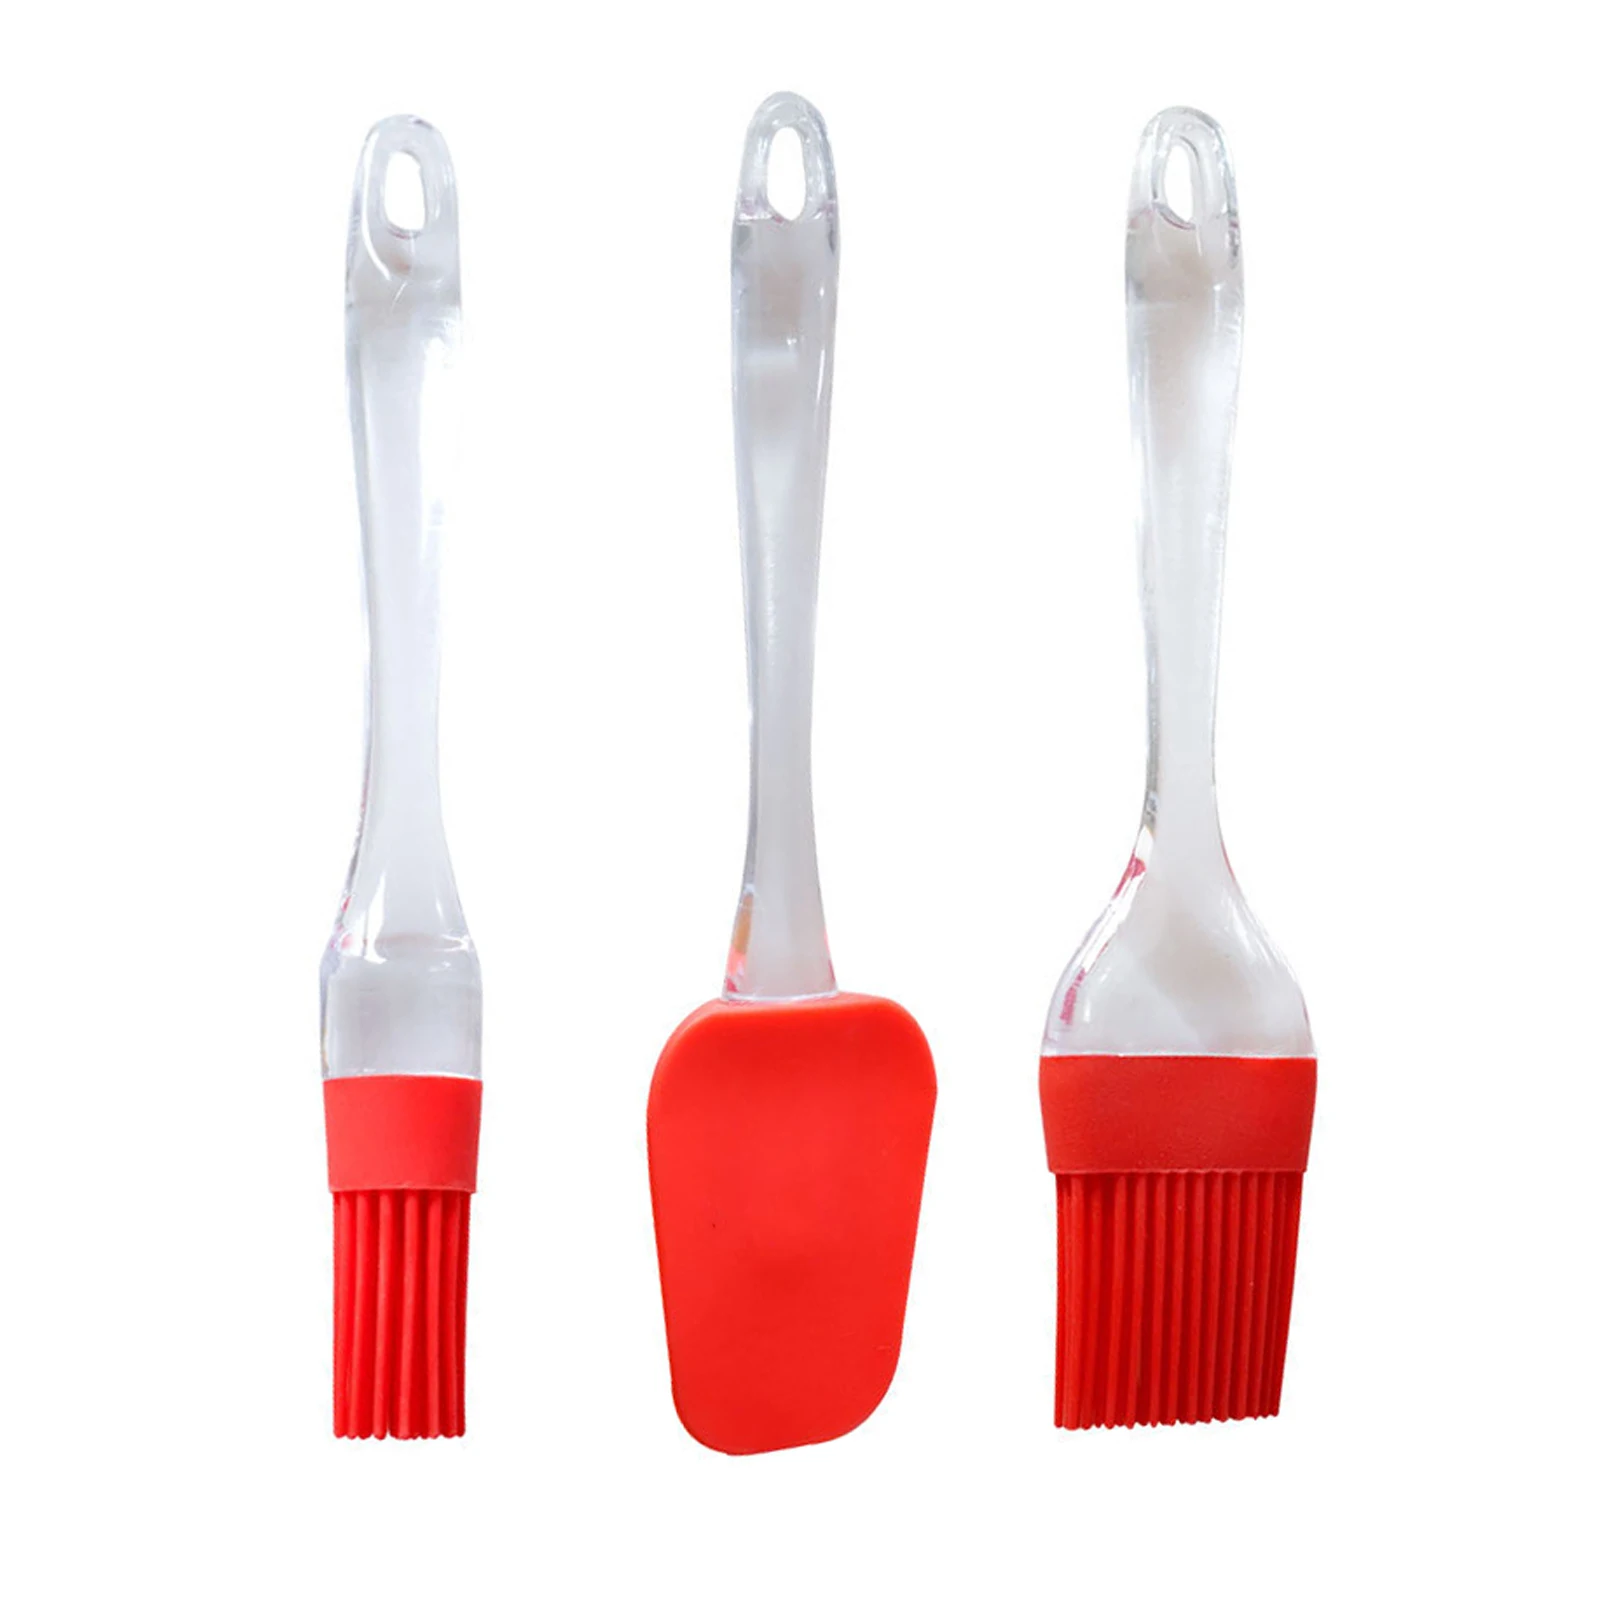 

2pcs Pastry Basting Brush Heat Resistant Baking For Cooking BBQ Plastic Handle Oil Sauce Butter Food 1 Spatula Home Kitchen